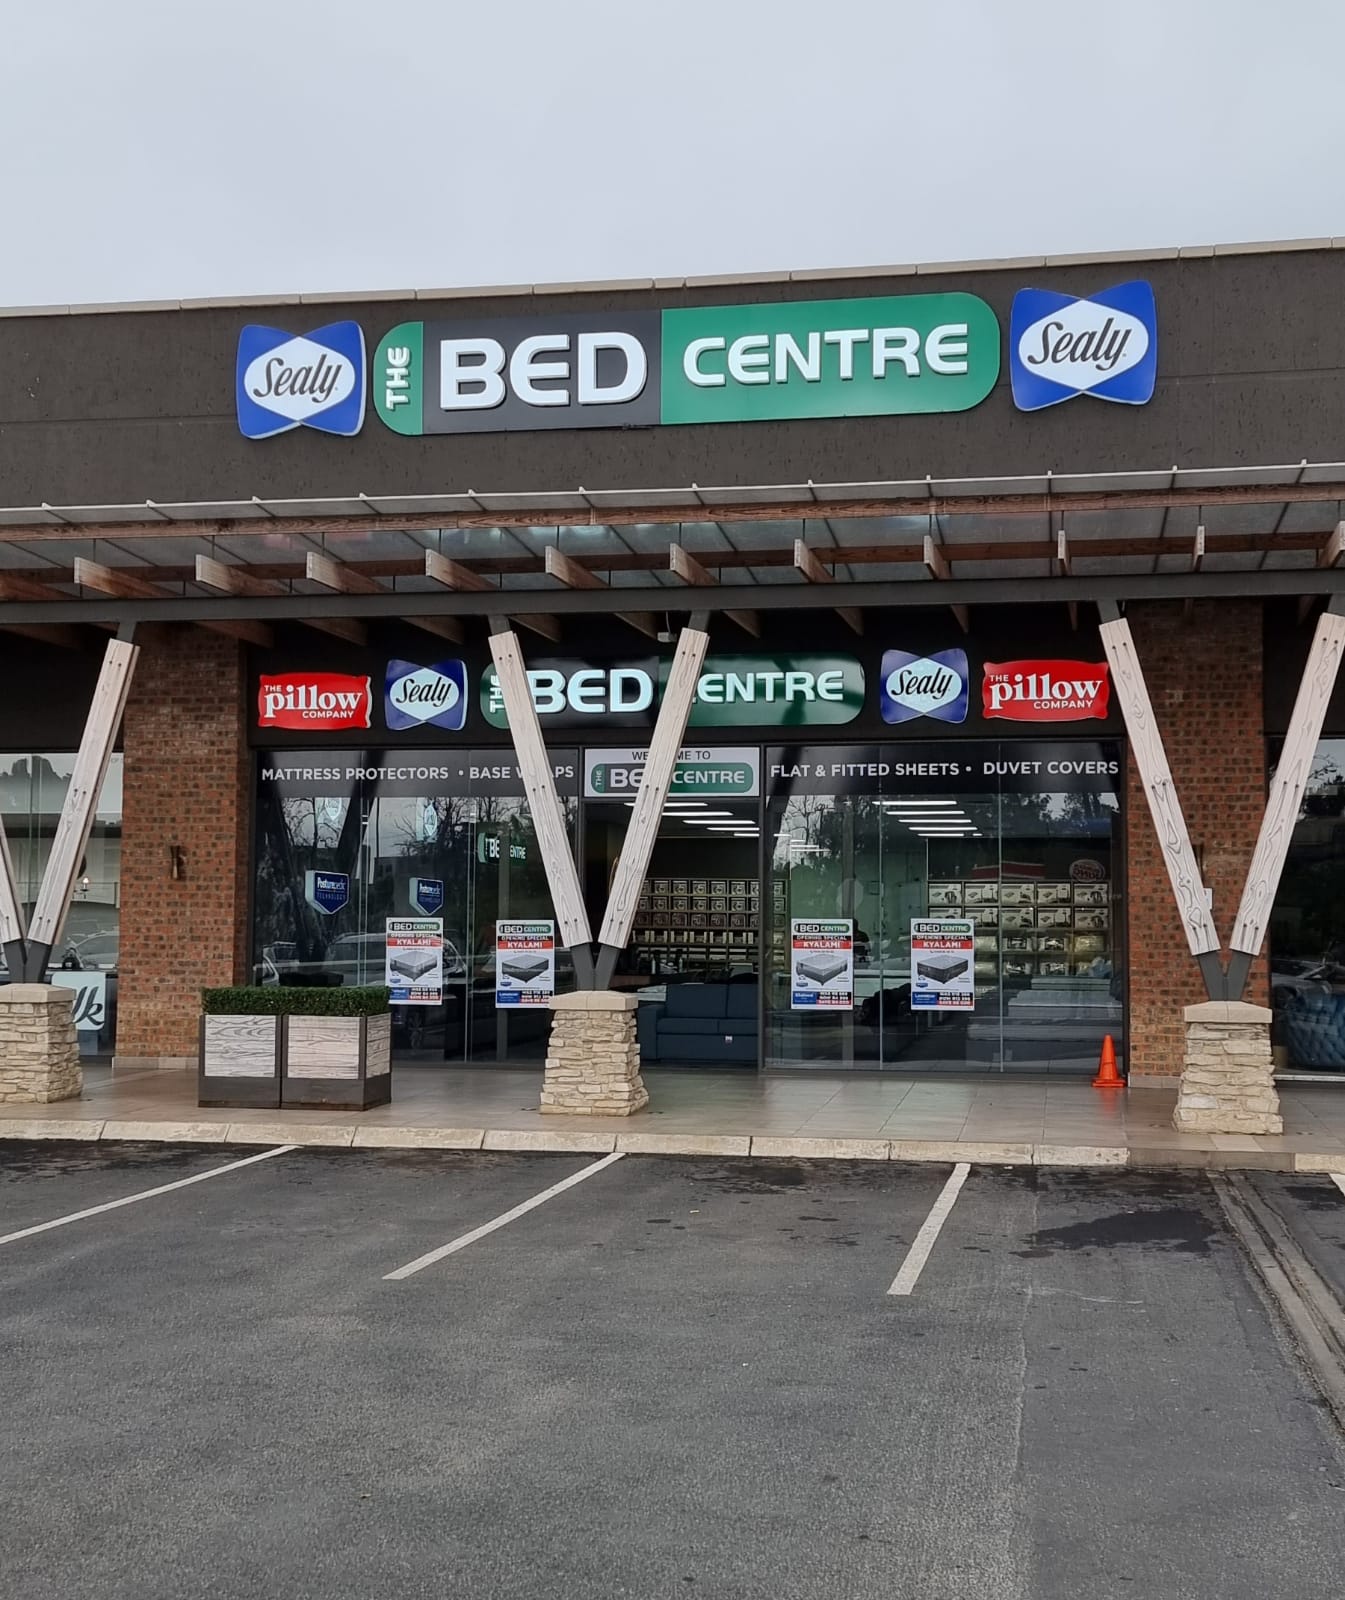 Beds For Sale - The Bed Centre Kyalami Midrand Johannesburg